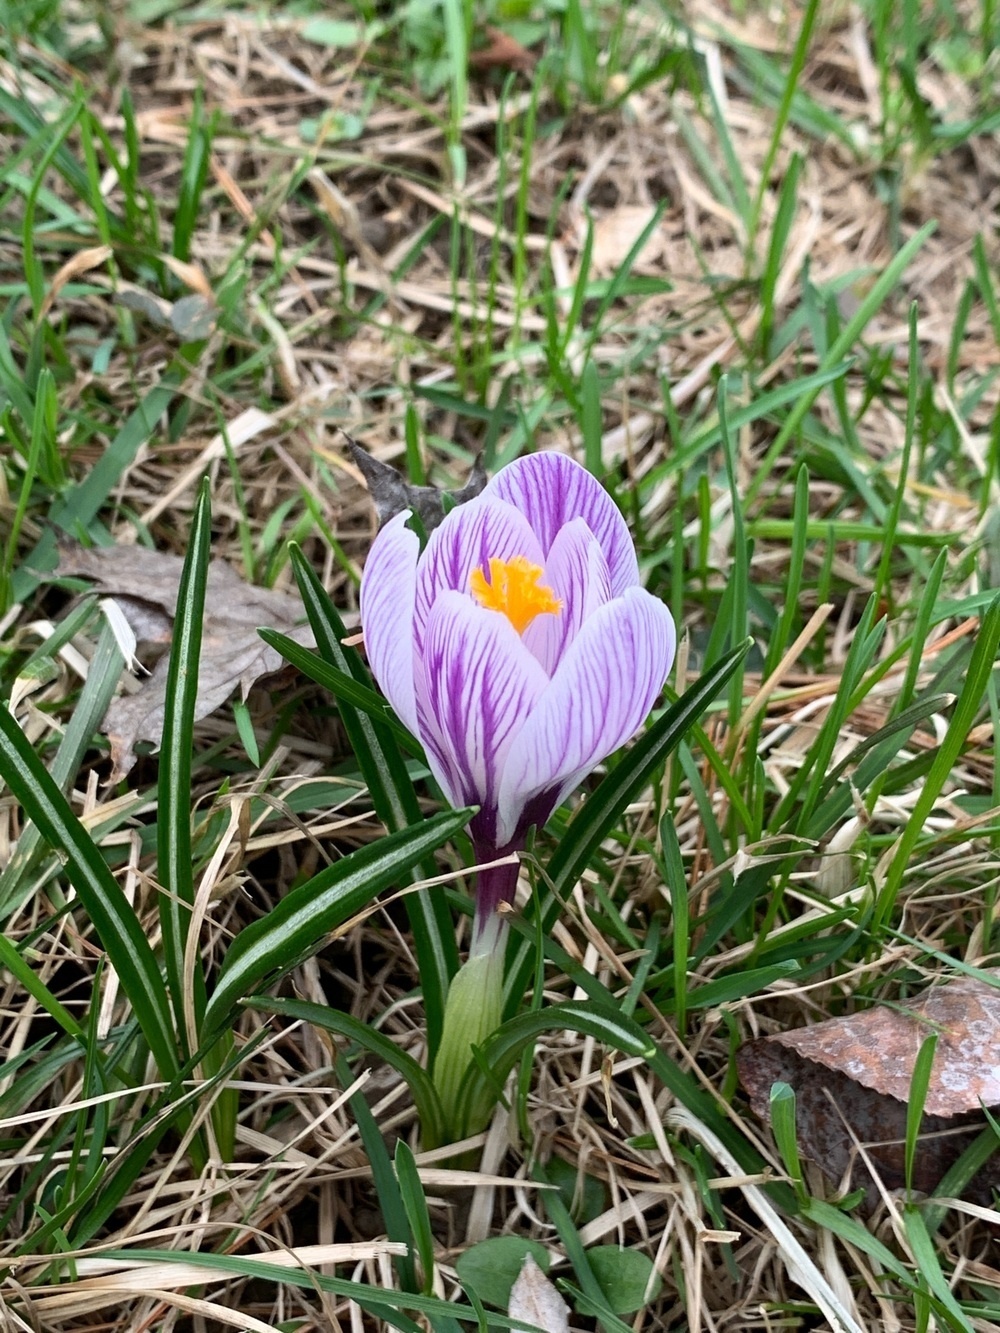 white and purple streaked crocus with bright yellow stamen surrounded by spring grass